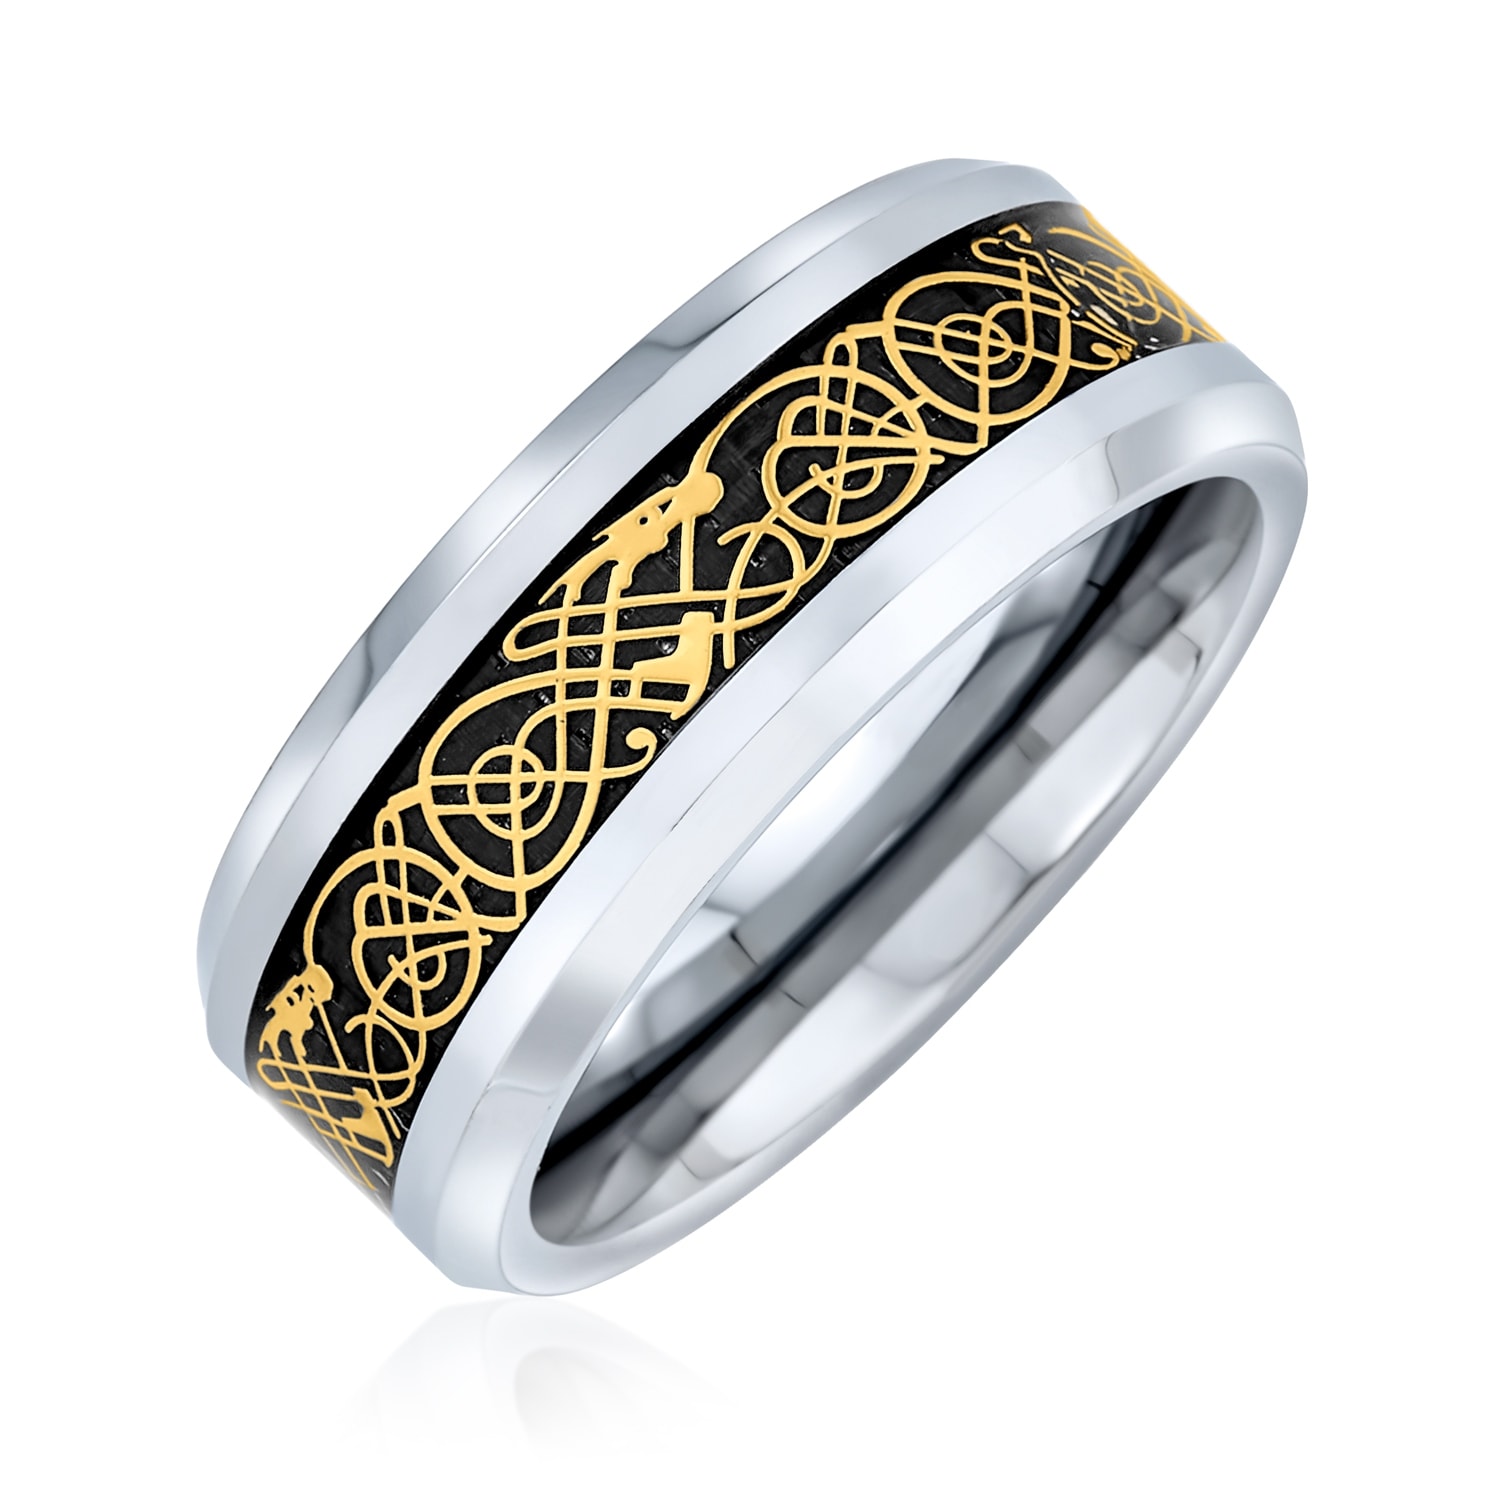 Titanium Stainless Dragon Ring Mens Jewelry Wedding Band Male Ring For Lovers